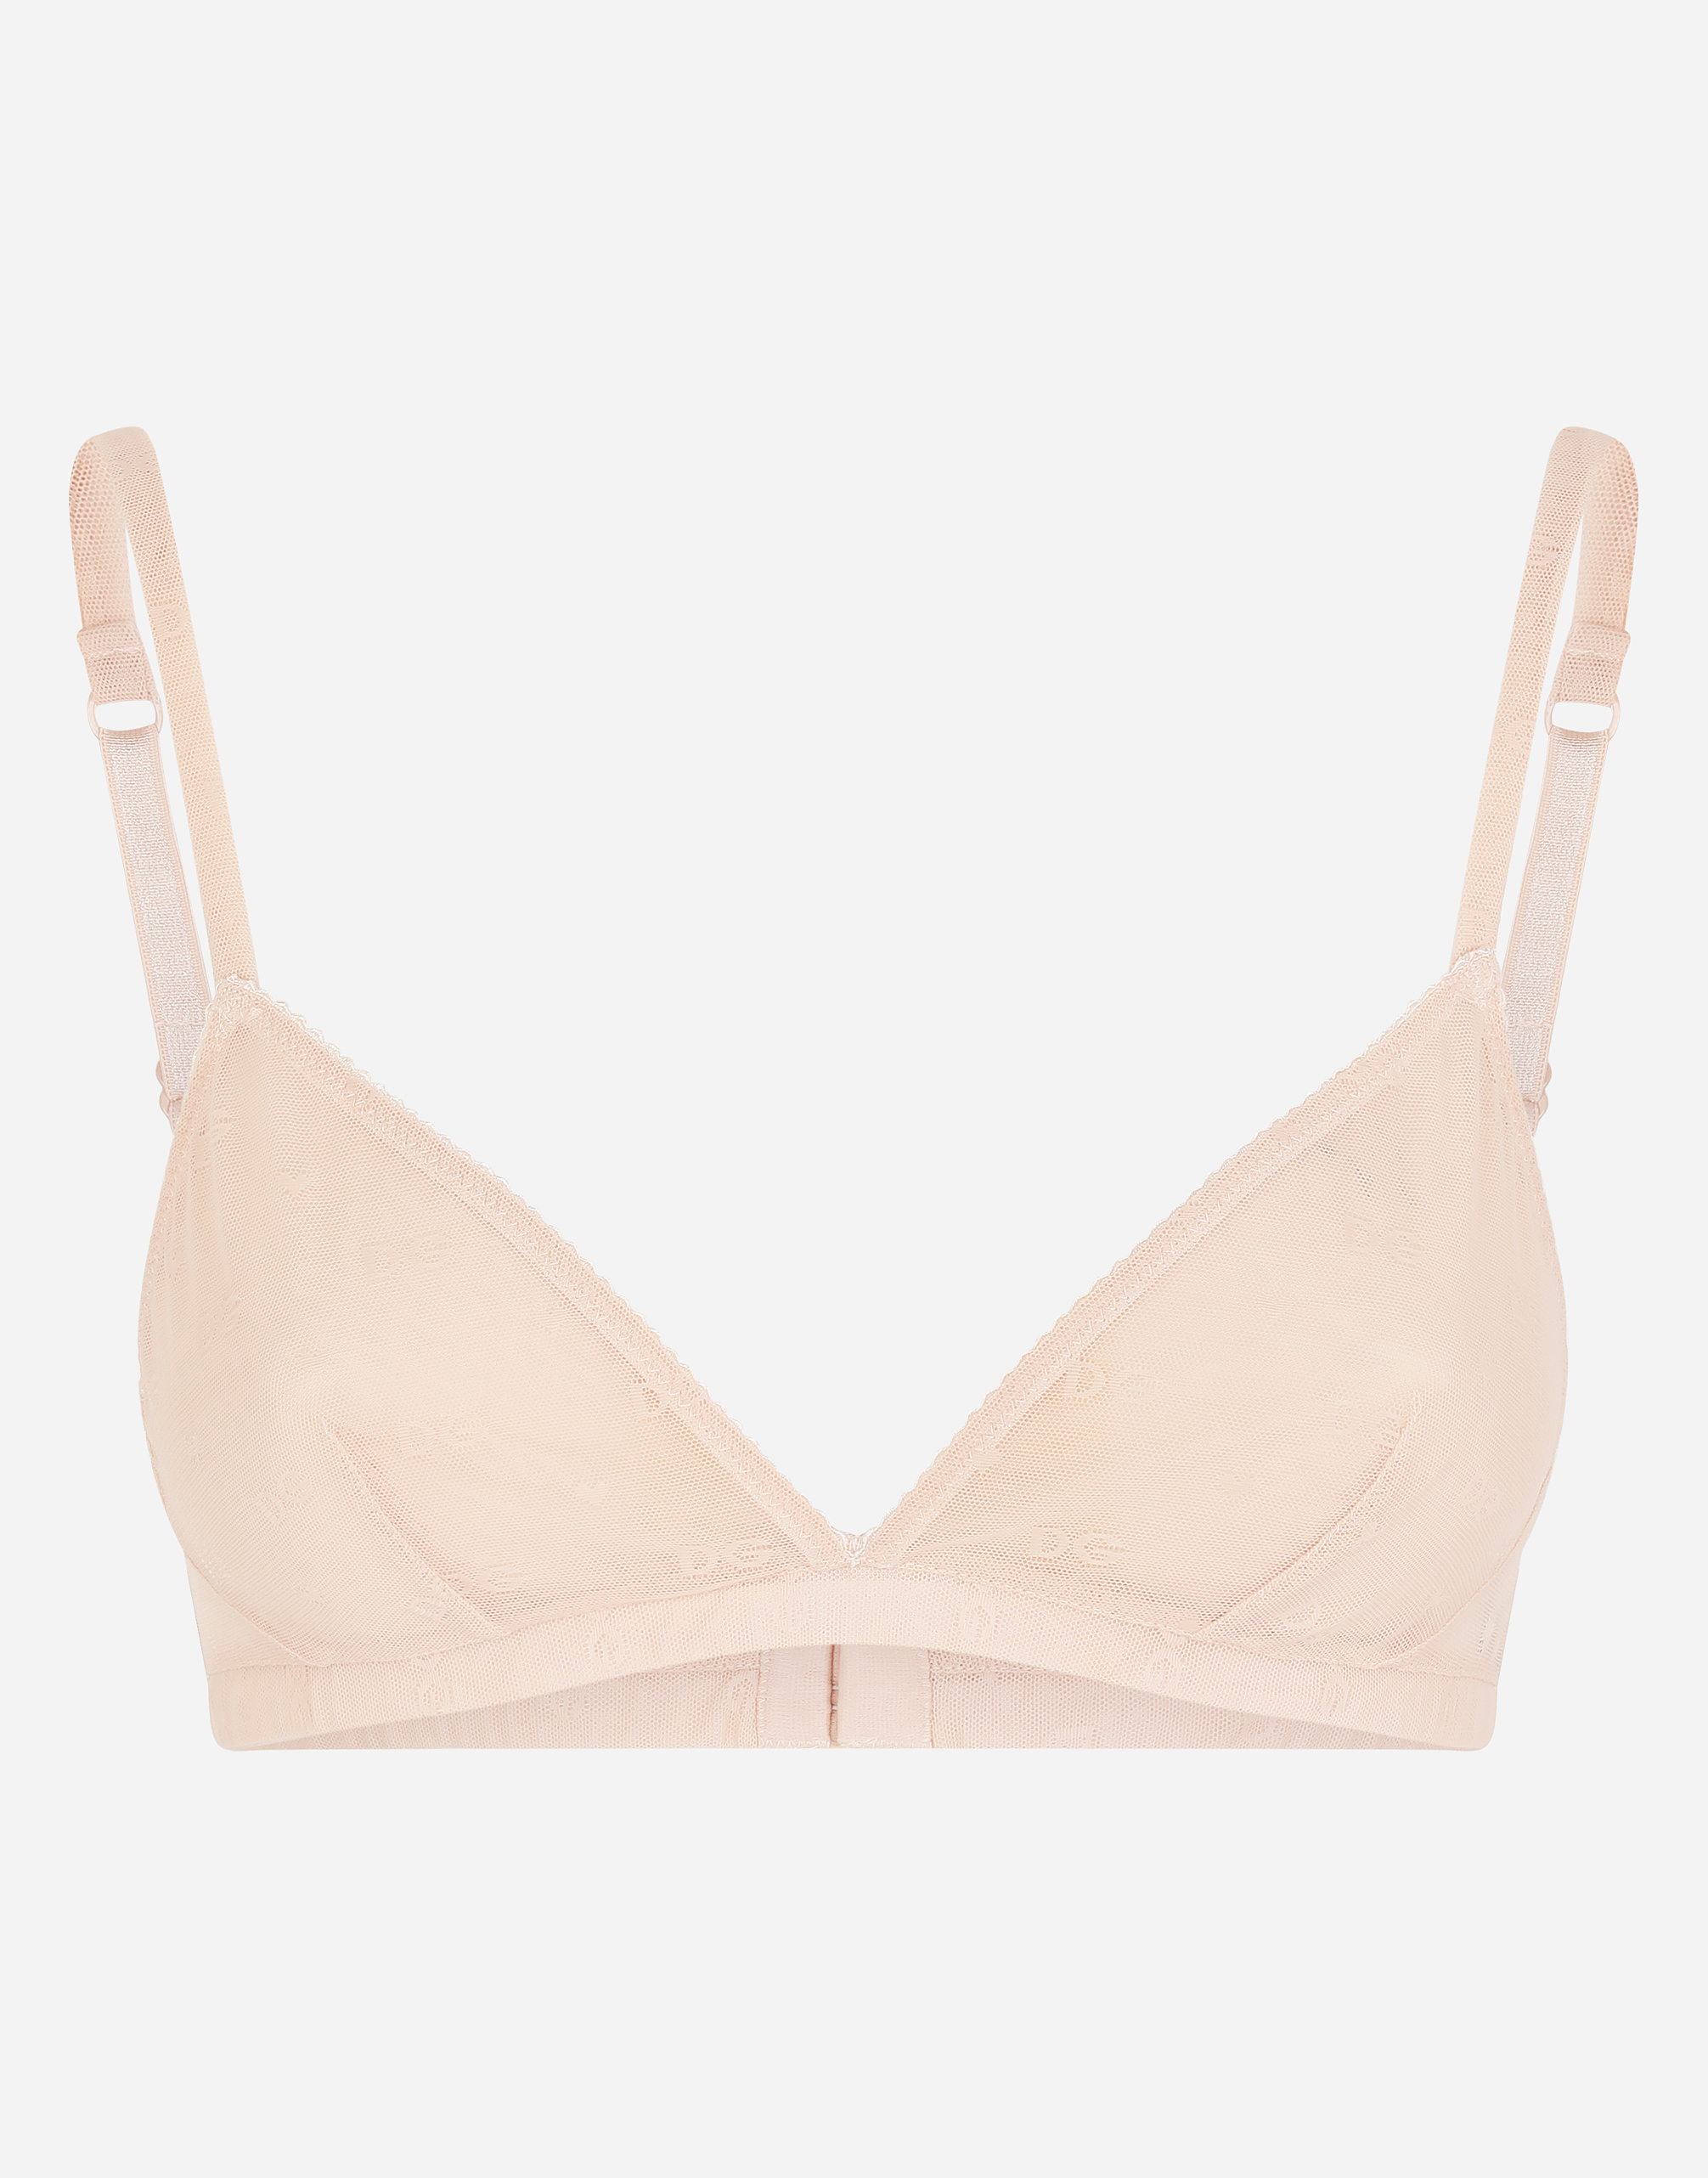 Jacquard tulle triangle bra in Pale Pink